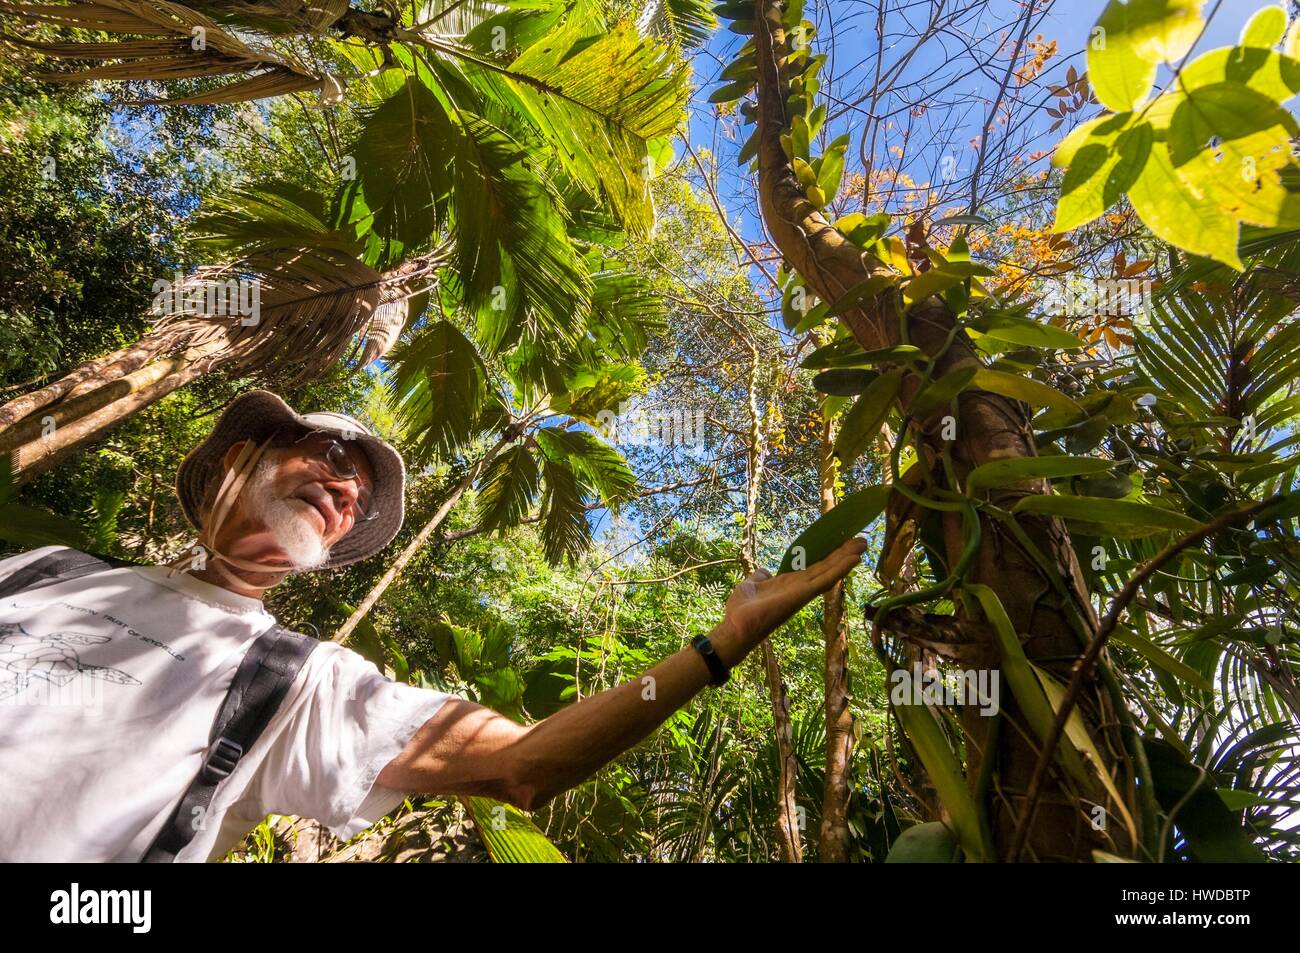 Seychelles, Silhouette Island, the South African ecologist Ron GERLACH of Nature Protection Trust of Seychelles, shows a vanilla liana on Mount Dauban Stock Photo